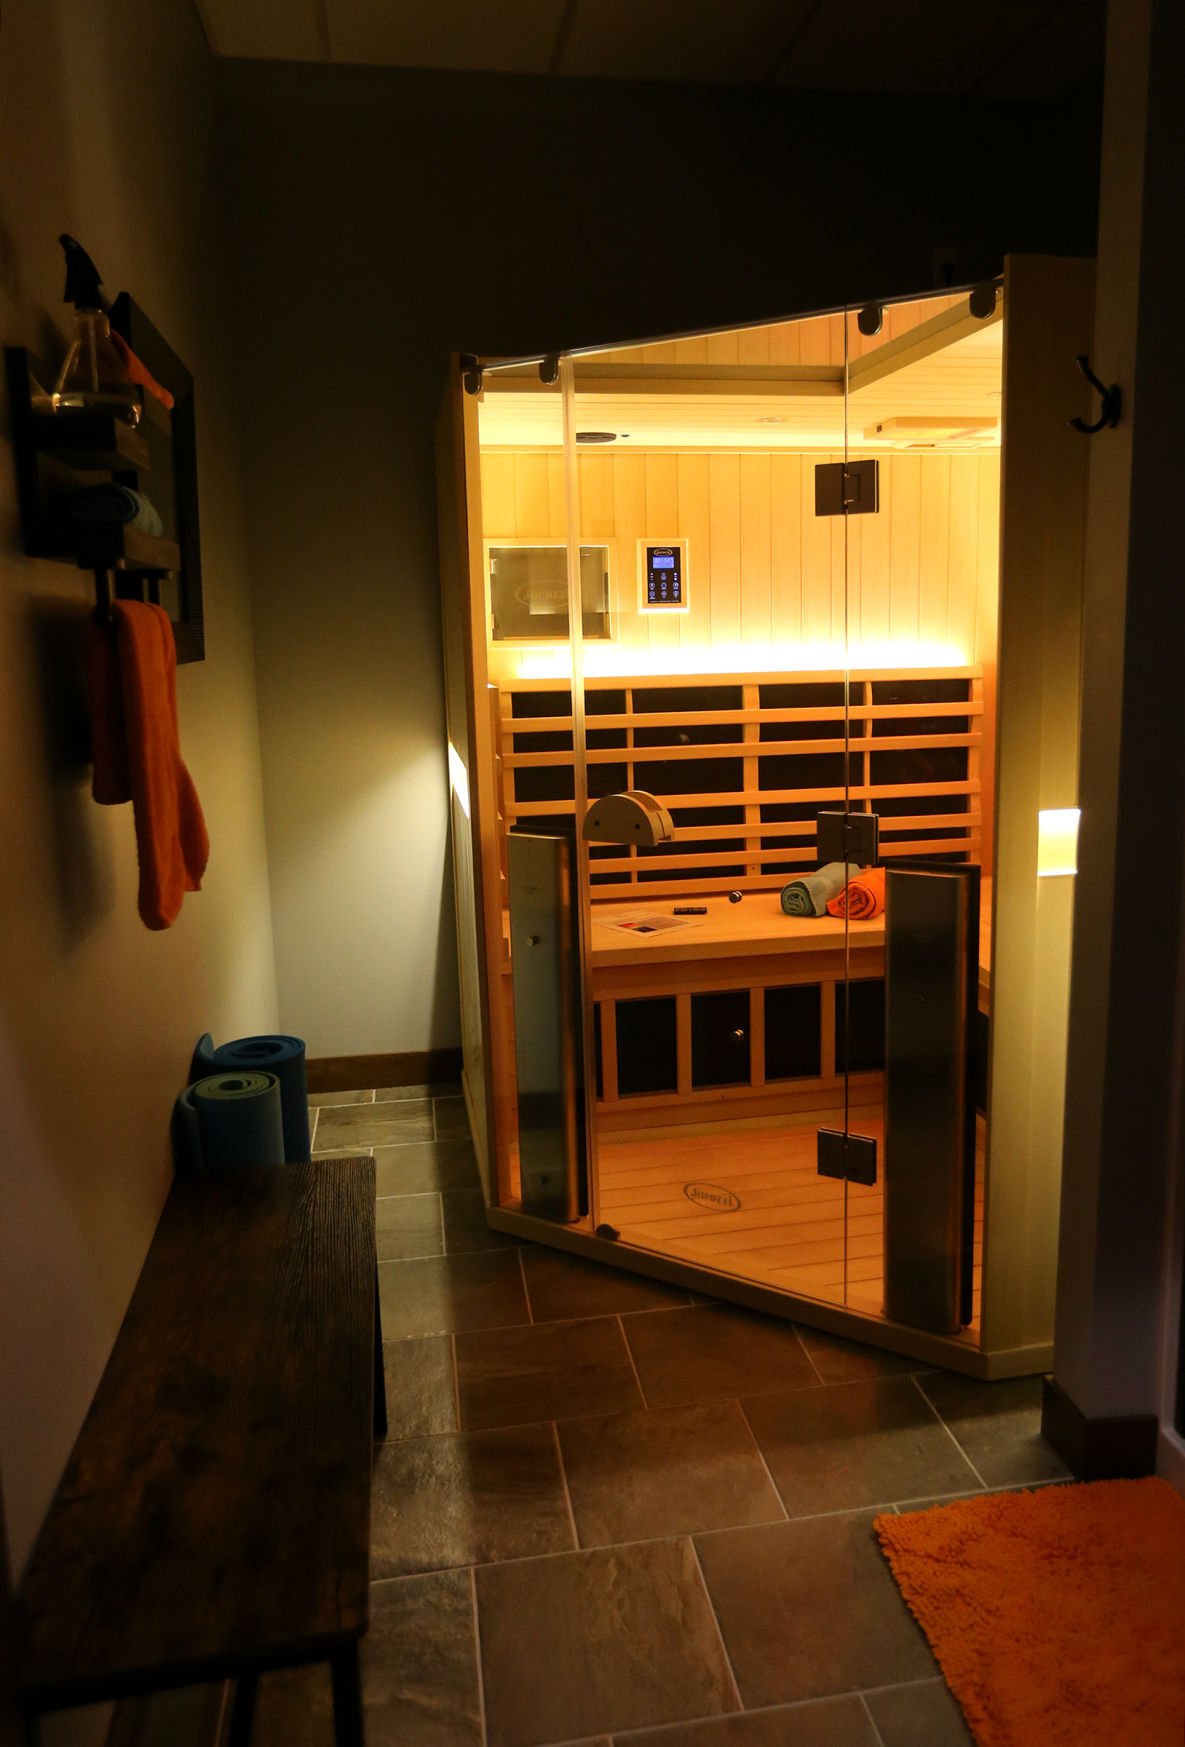 An infrared sauna room at Restore and Renew Therapeutics in Asbury, Iowa.    PHOTO CREDIT: JESSICA REILLY